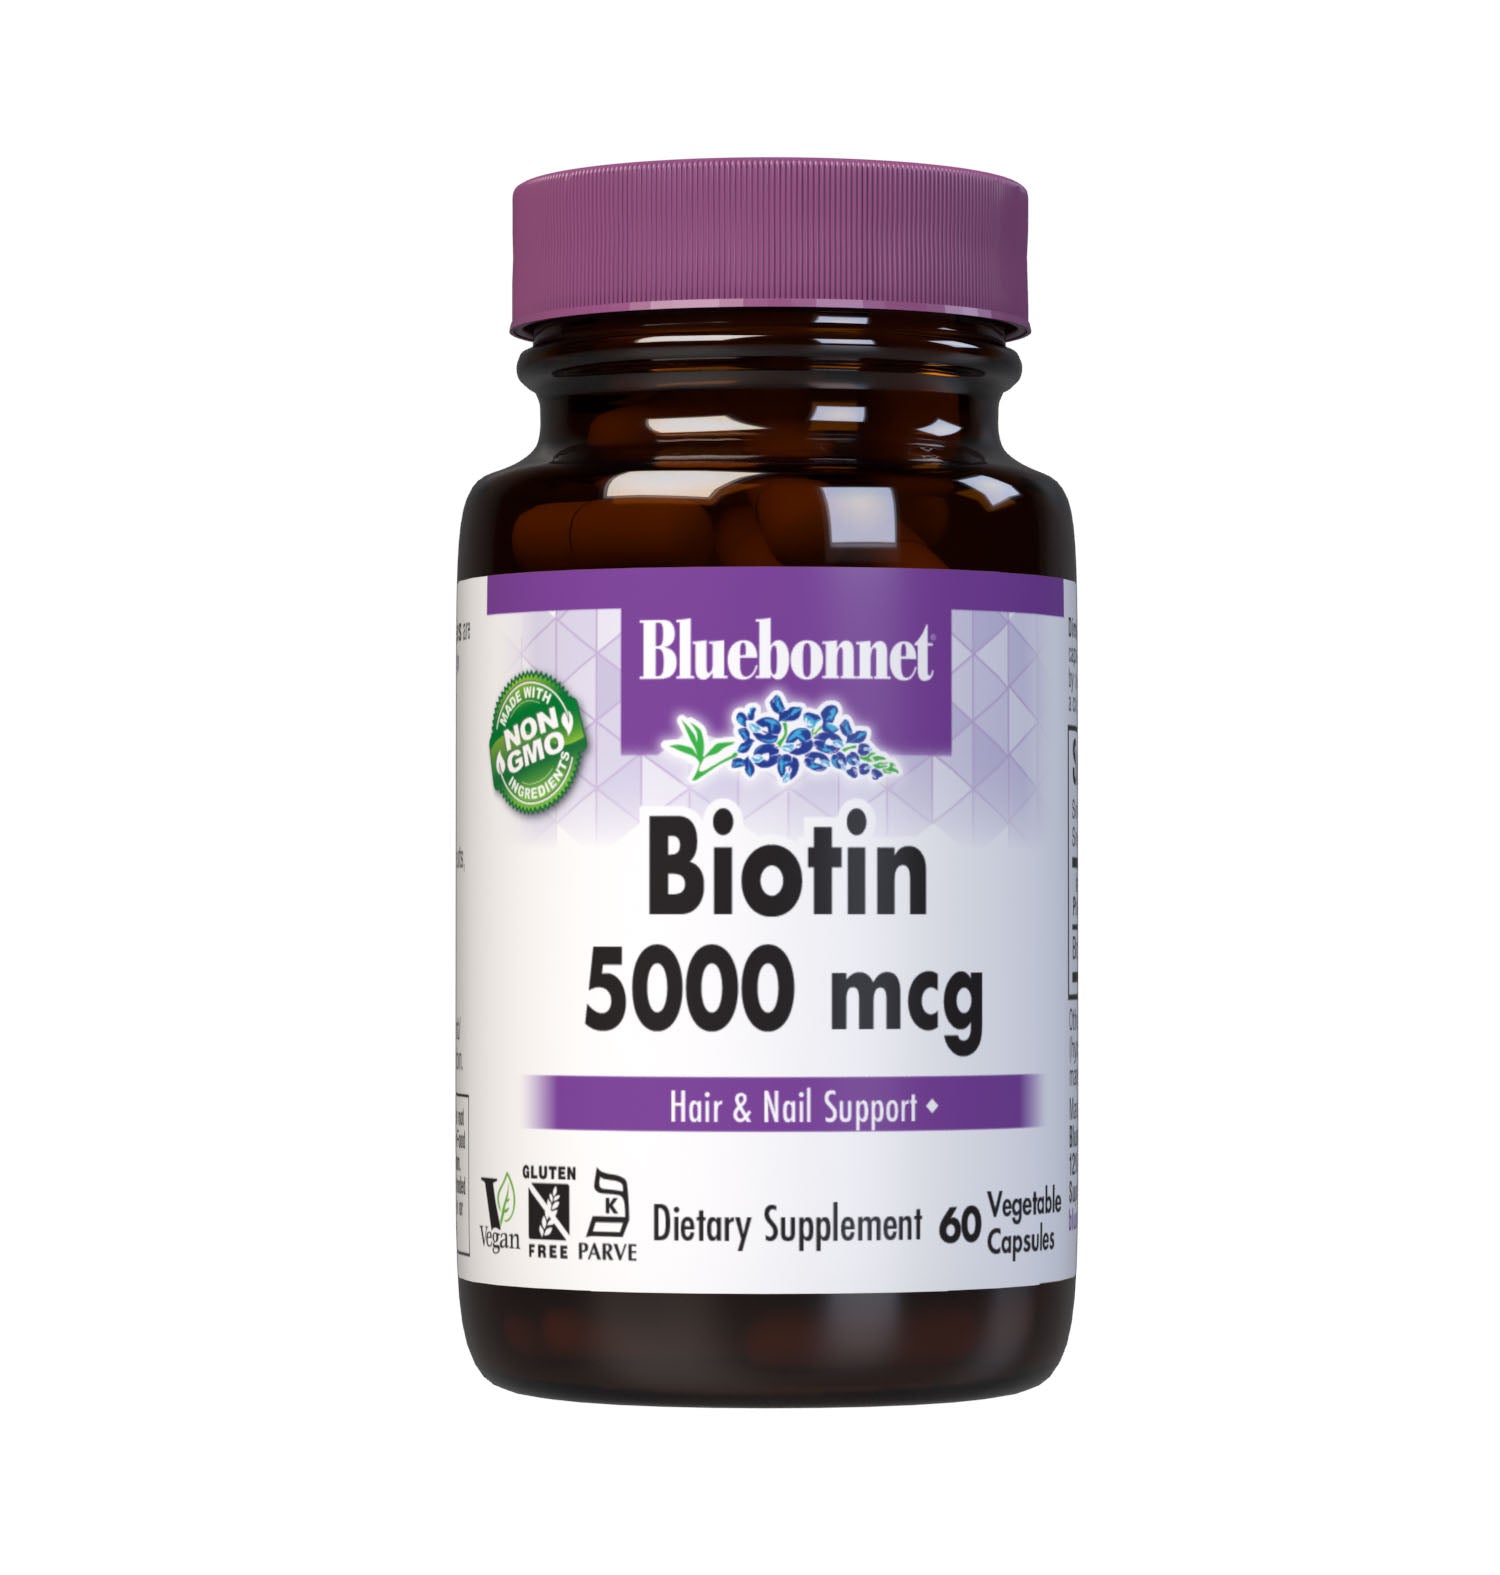 Bluebonnet’s Biotin 5000 mcg Capsules are formulated with yeast-free biotin in its crystalline form to support healthy hair and strong, durable nails. #size_60 count